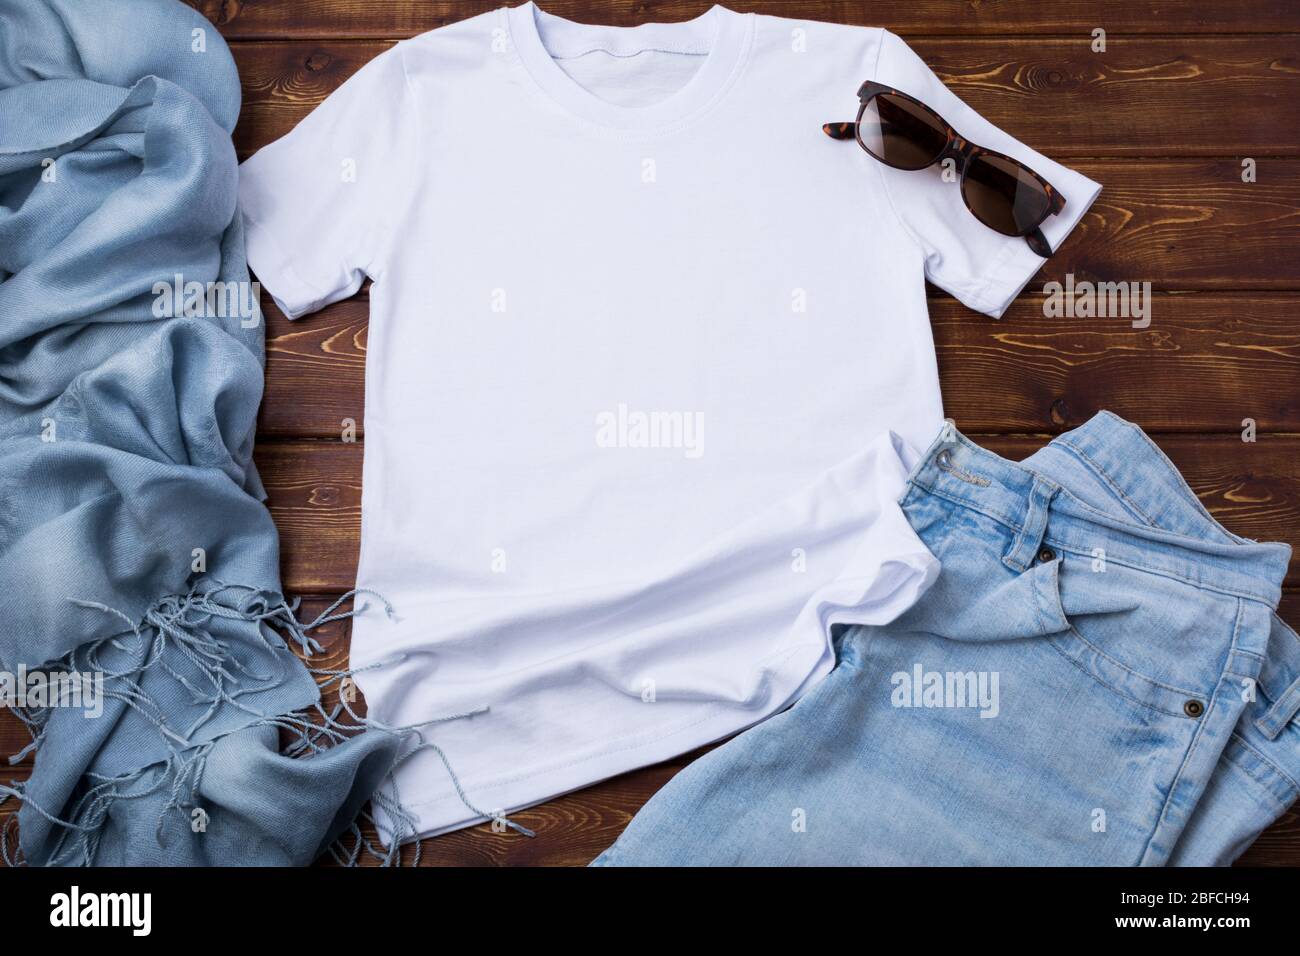 White women’s cotton T-shirt mockup with blue jeans, sunglasses and ...